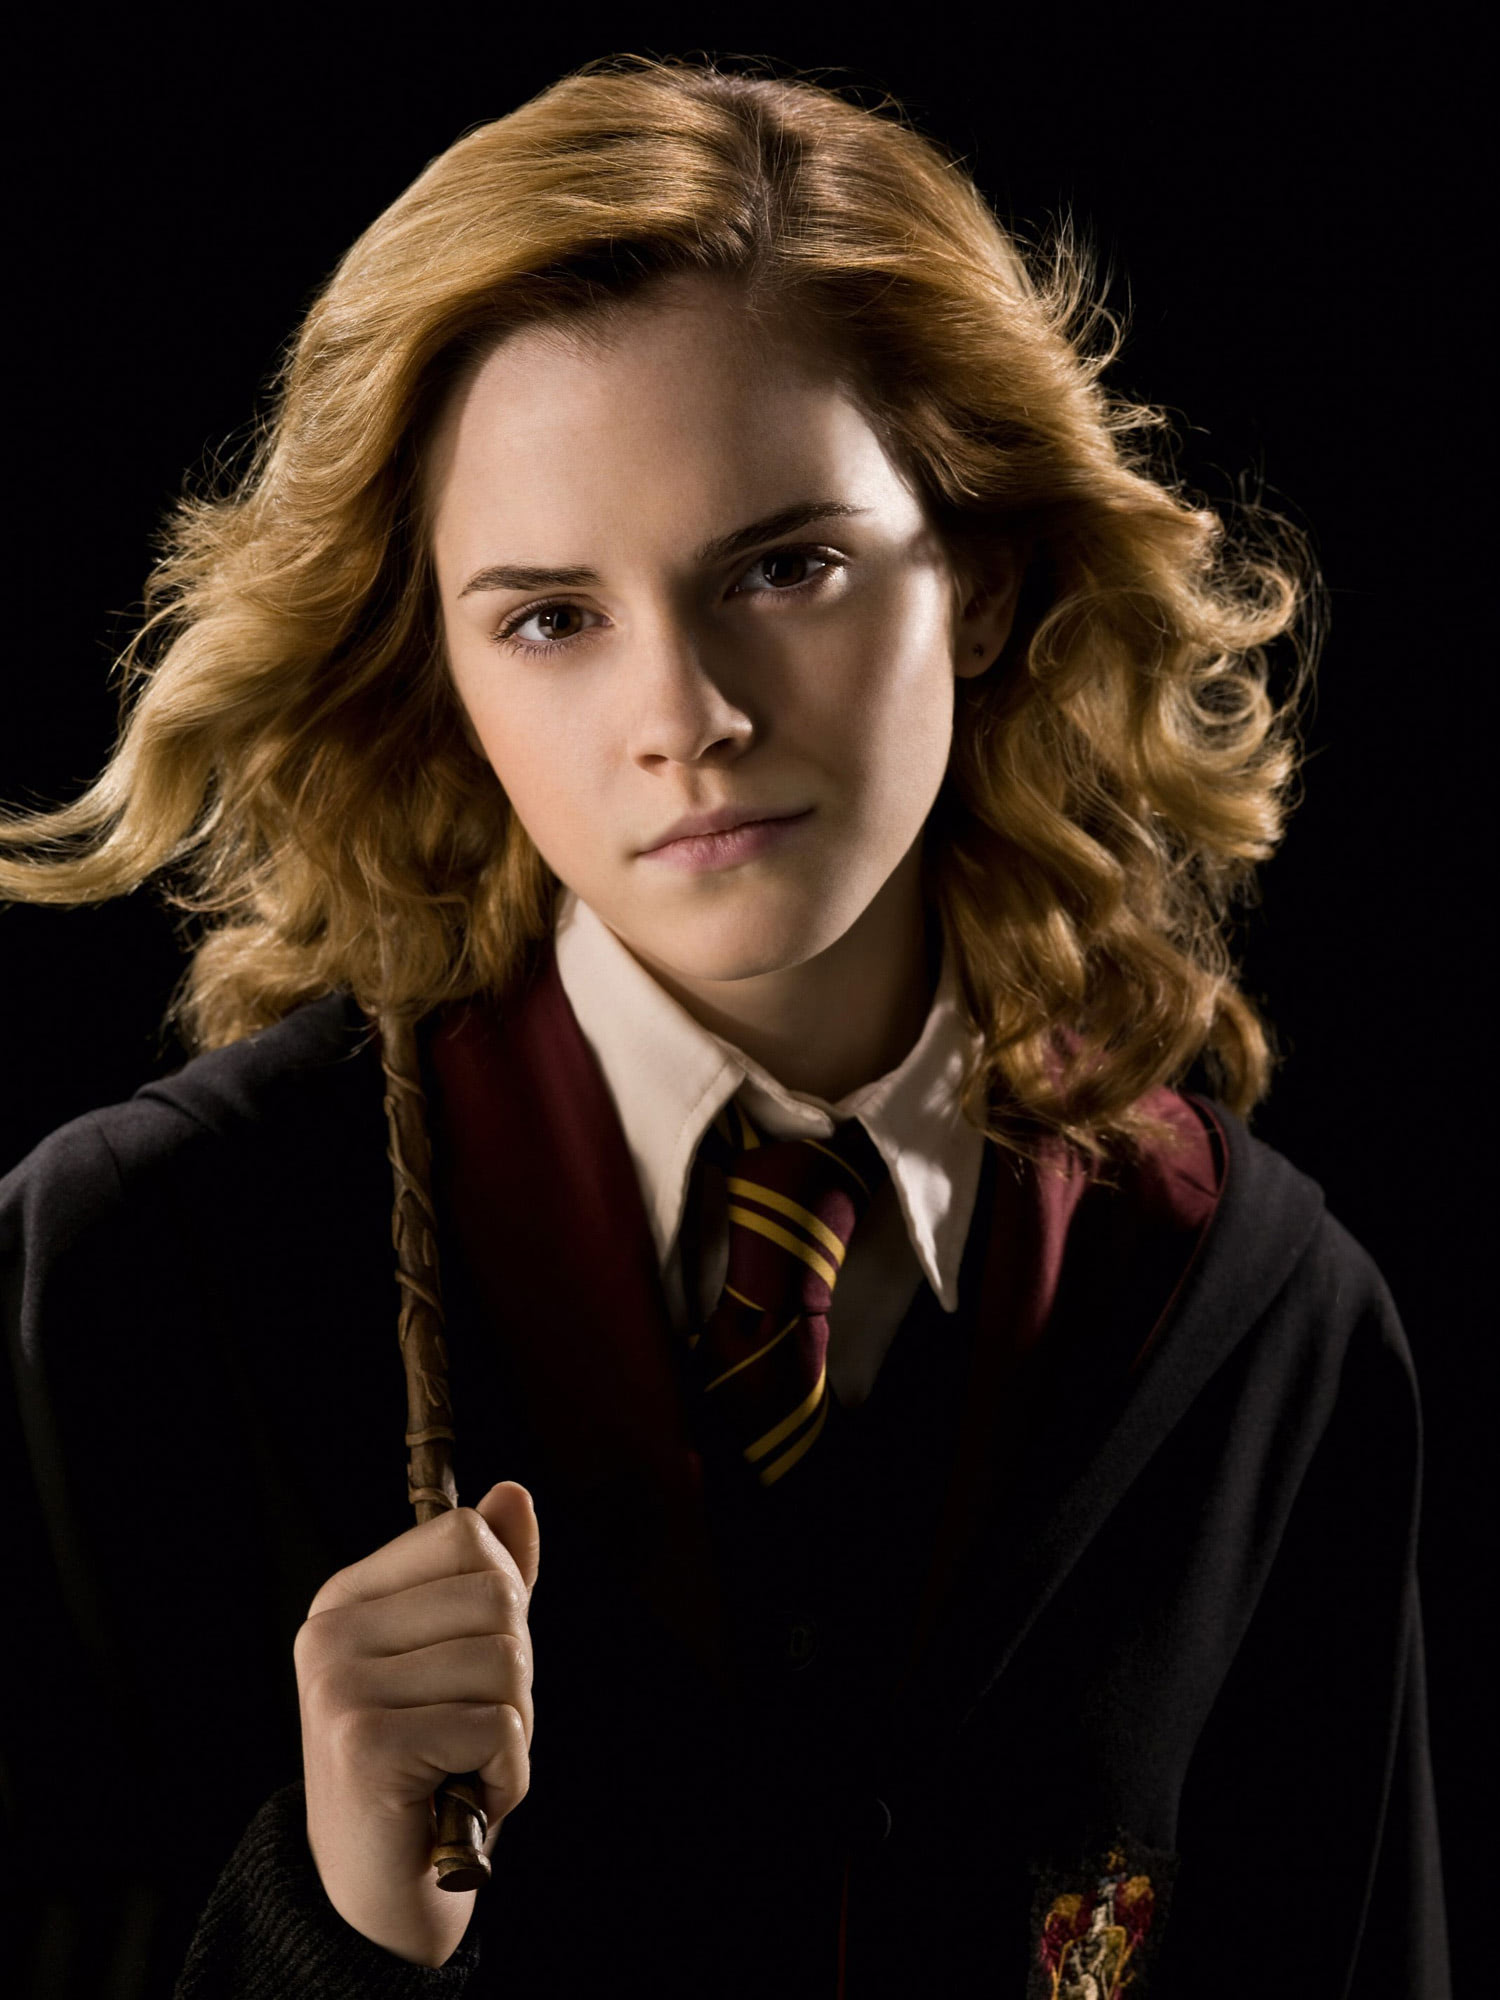 allison gouveia recommends pics of hermione from harry potter pic